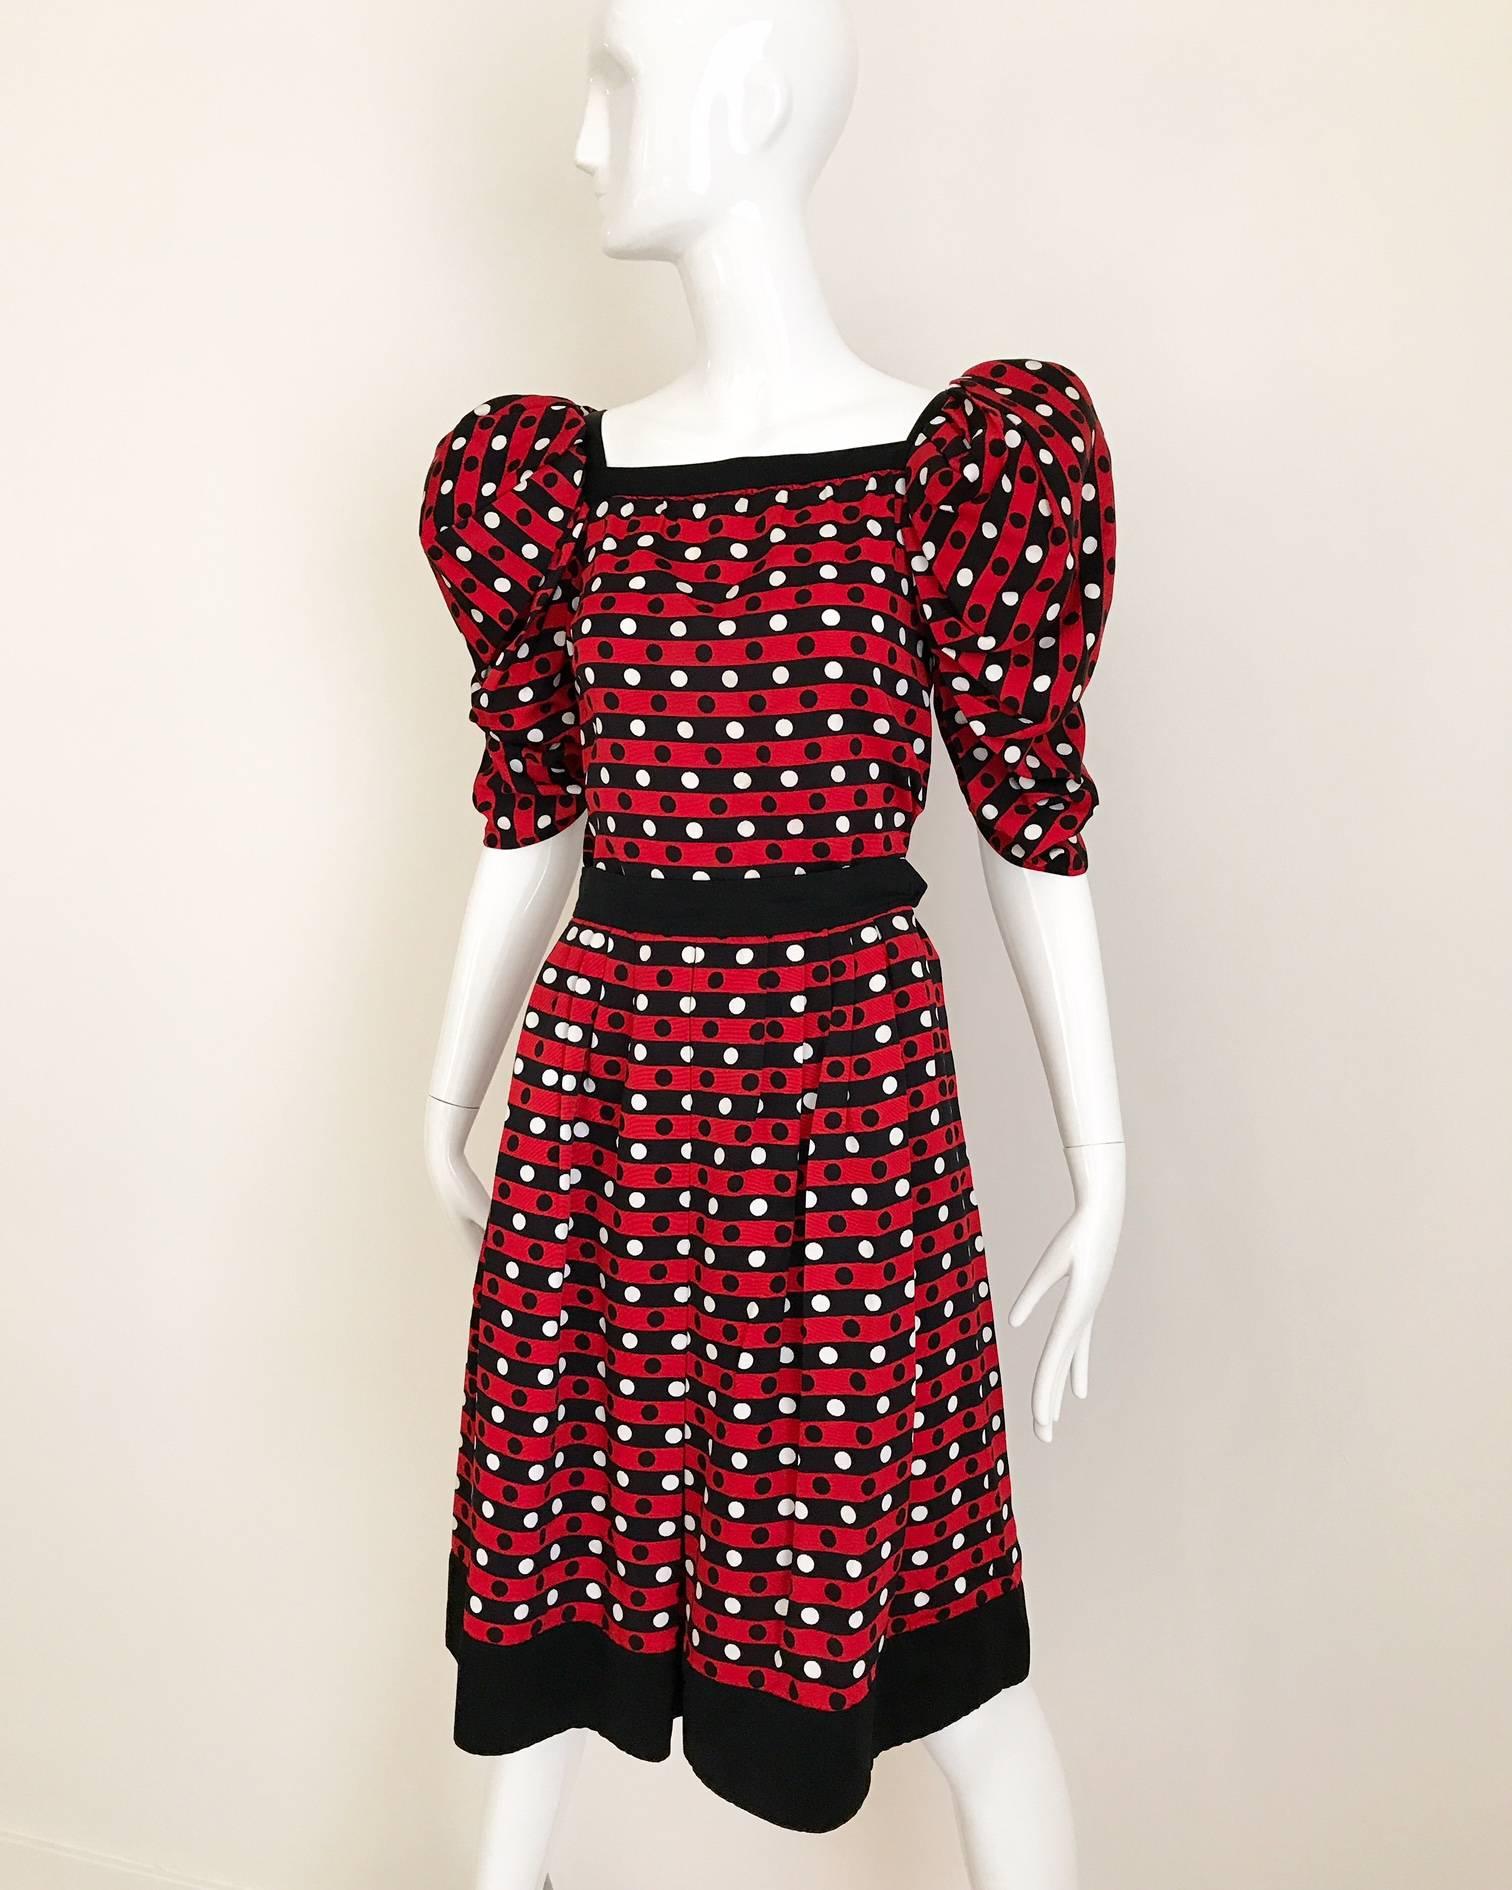 Early 80s Yves Saint Laurent red, white and black polkadot silk twill blouse with puffy sleeves. slip on blouse ( no zipper) knife pleats skirt with pockets.
Blouse fit size 2/4/6 Small- medium 34" bust / hip : 38 ( blouse)
Skirt: 24" (